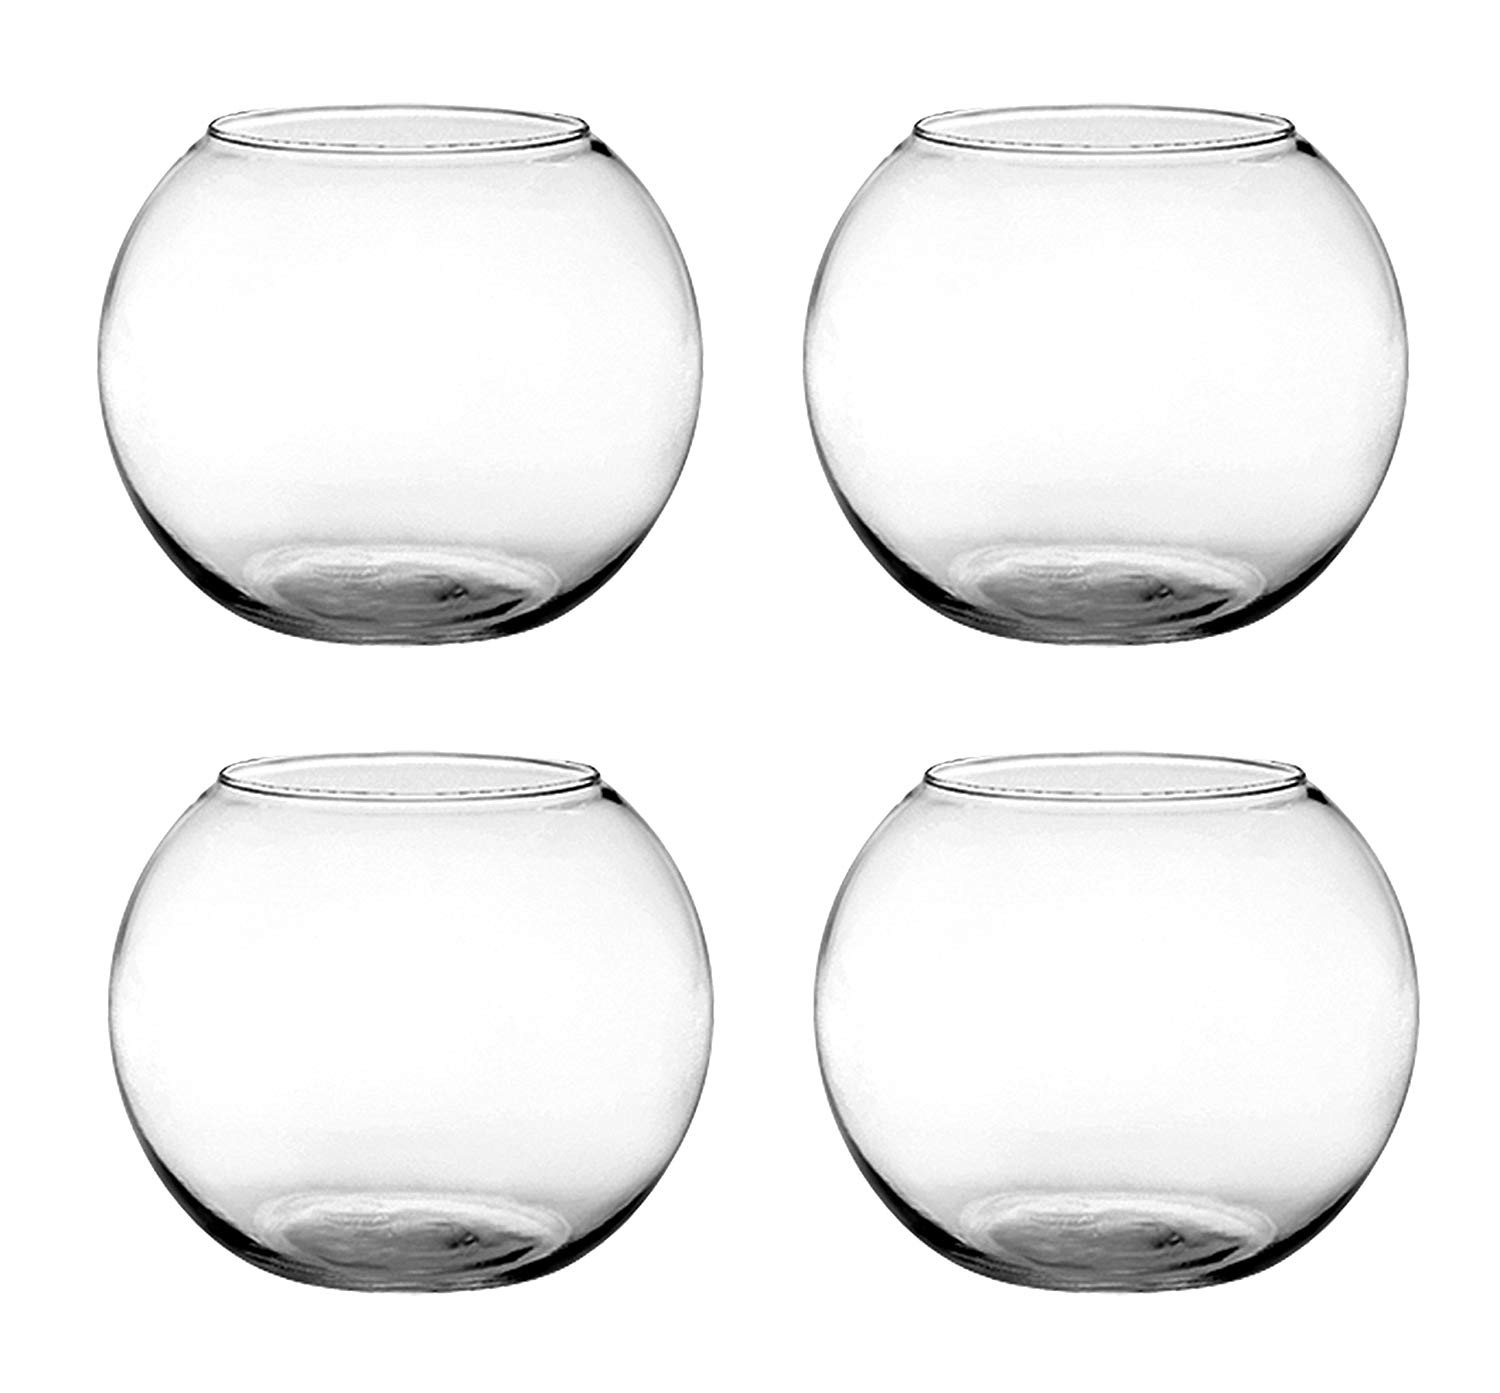 13 Best Very Large Clear Glass Vases 2024 free download very large clear glass vases of amazon com set of 4 syndicate sales 6 inches clear rose bowl within amazon com set of 4 syndicate sales 6 inches clear rose bowl bundled by maven gifts garden